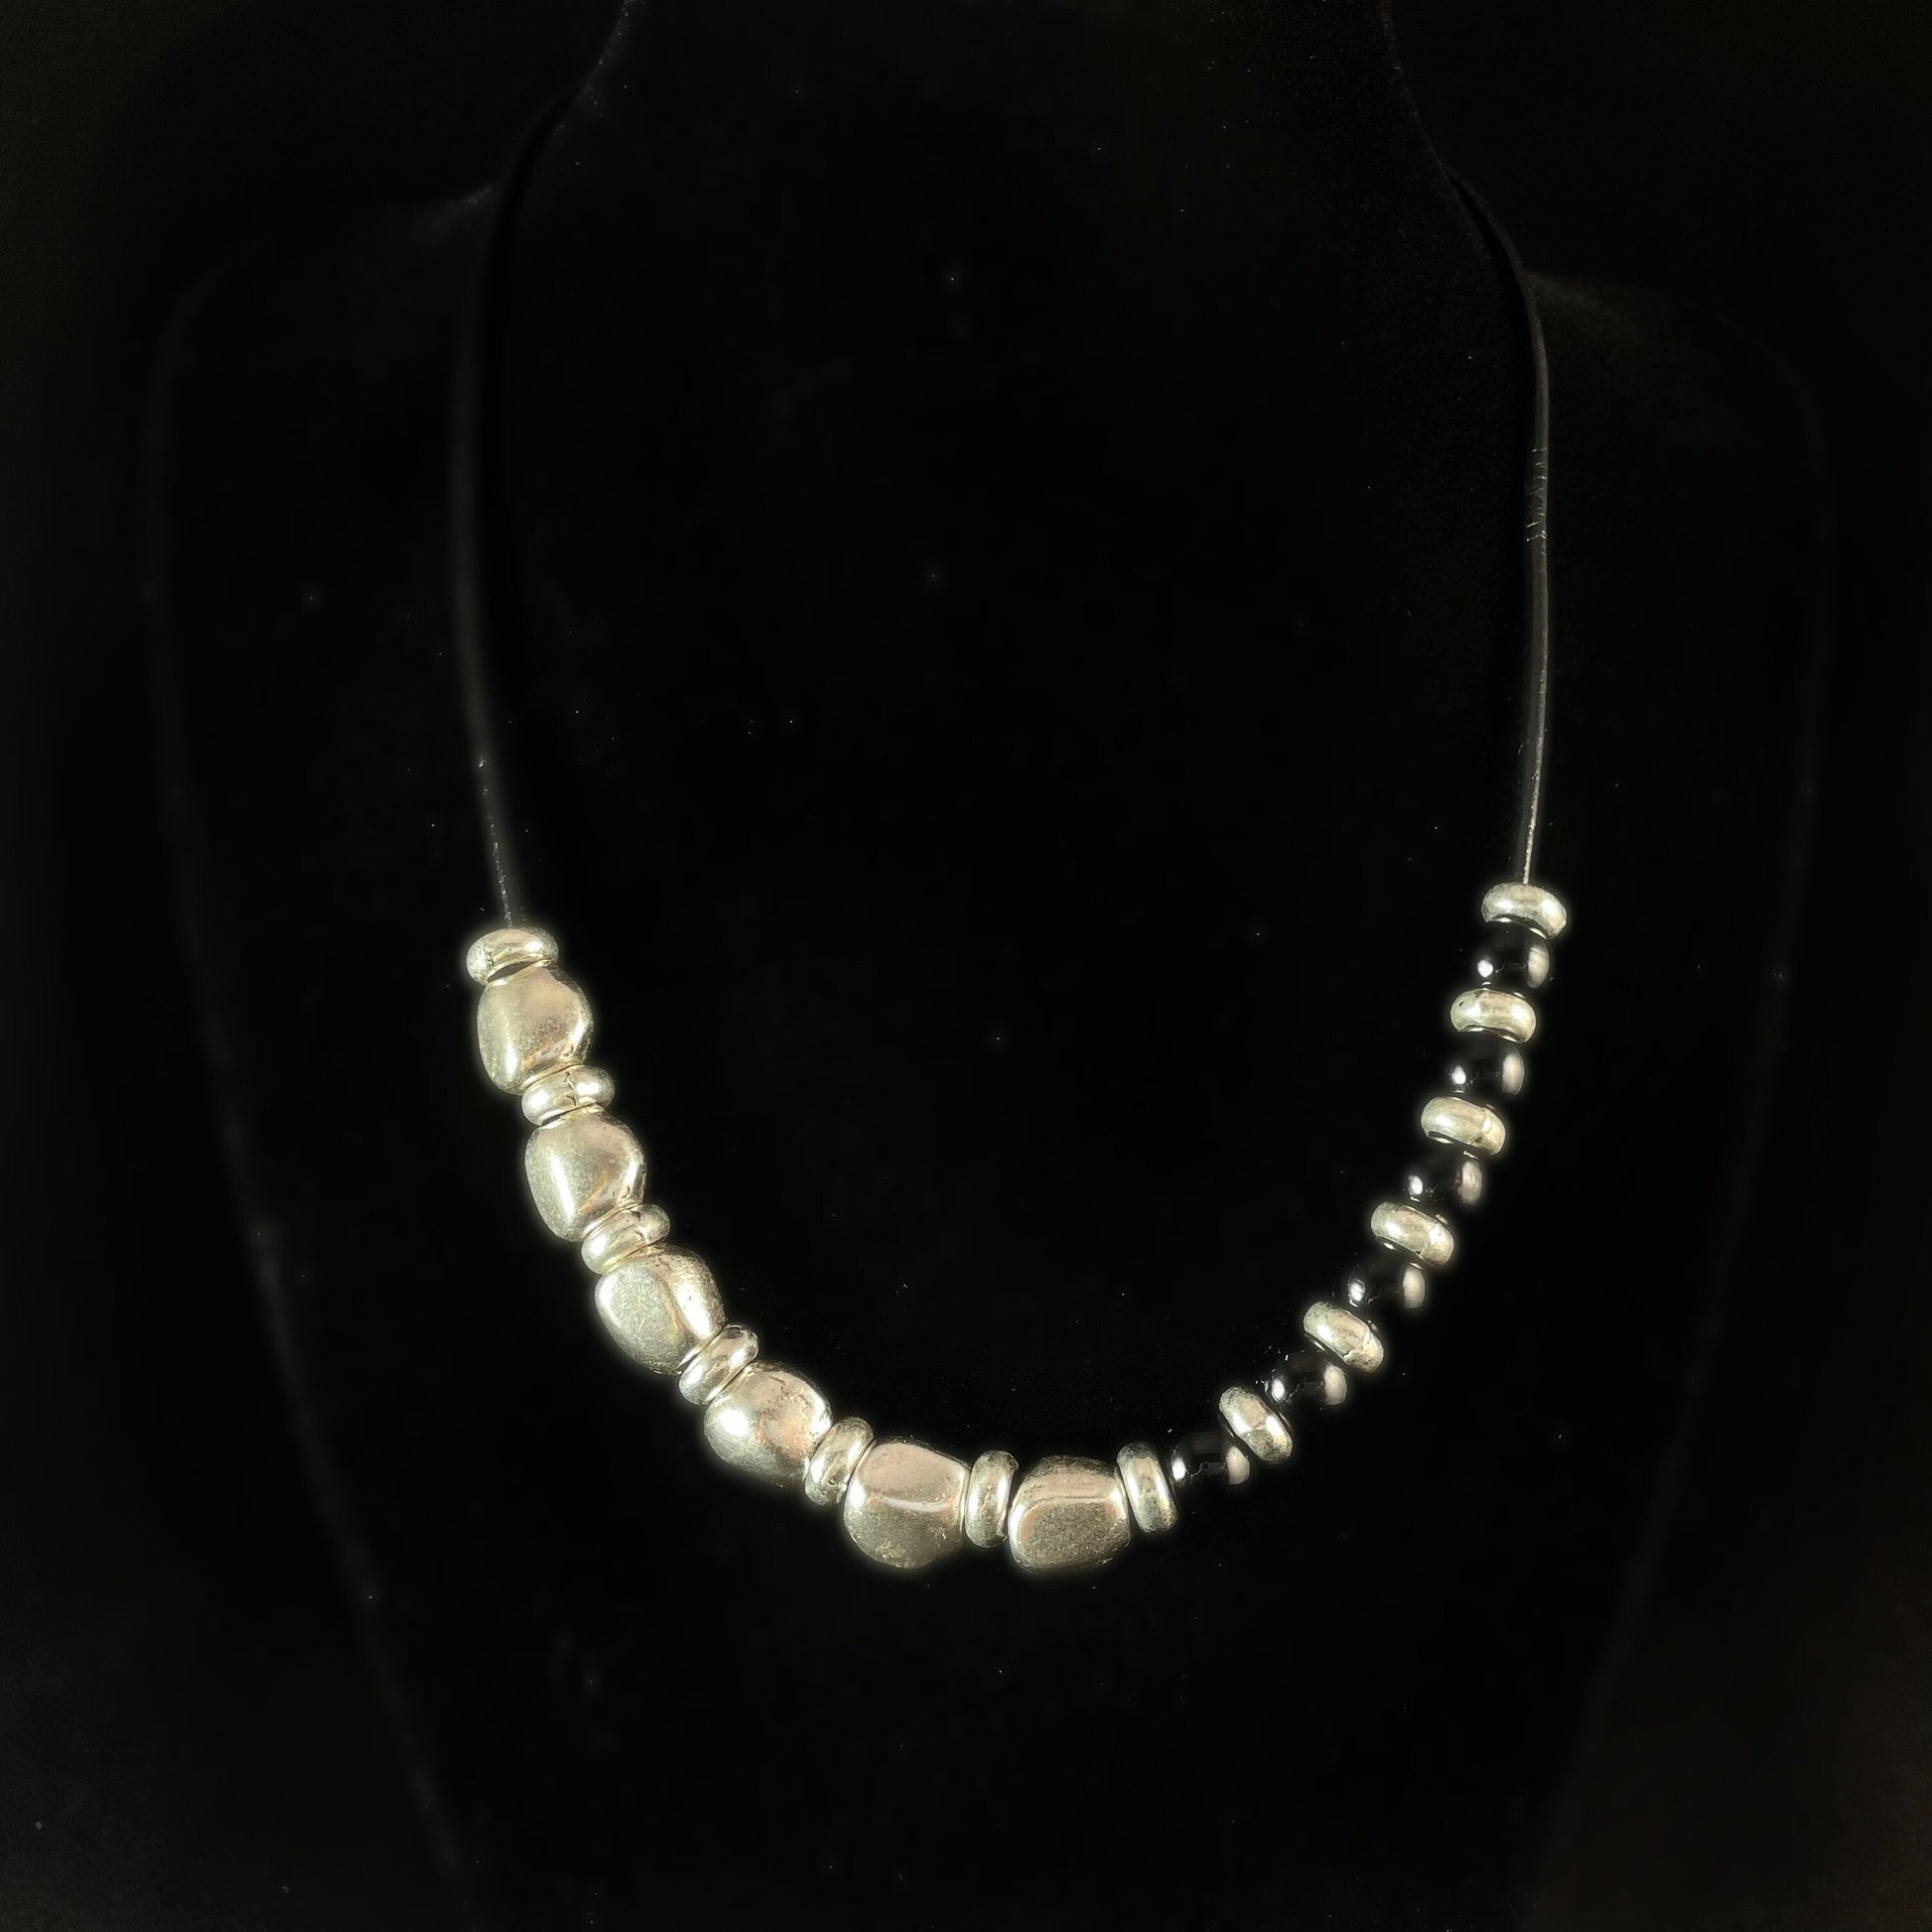 Silver and Black Beaded, Leather Cord Necklace - Handmade in Spain